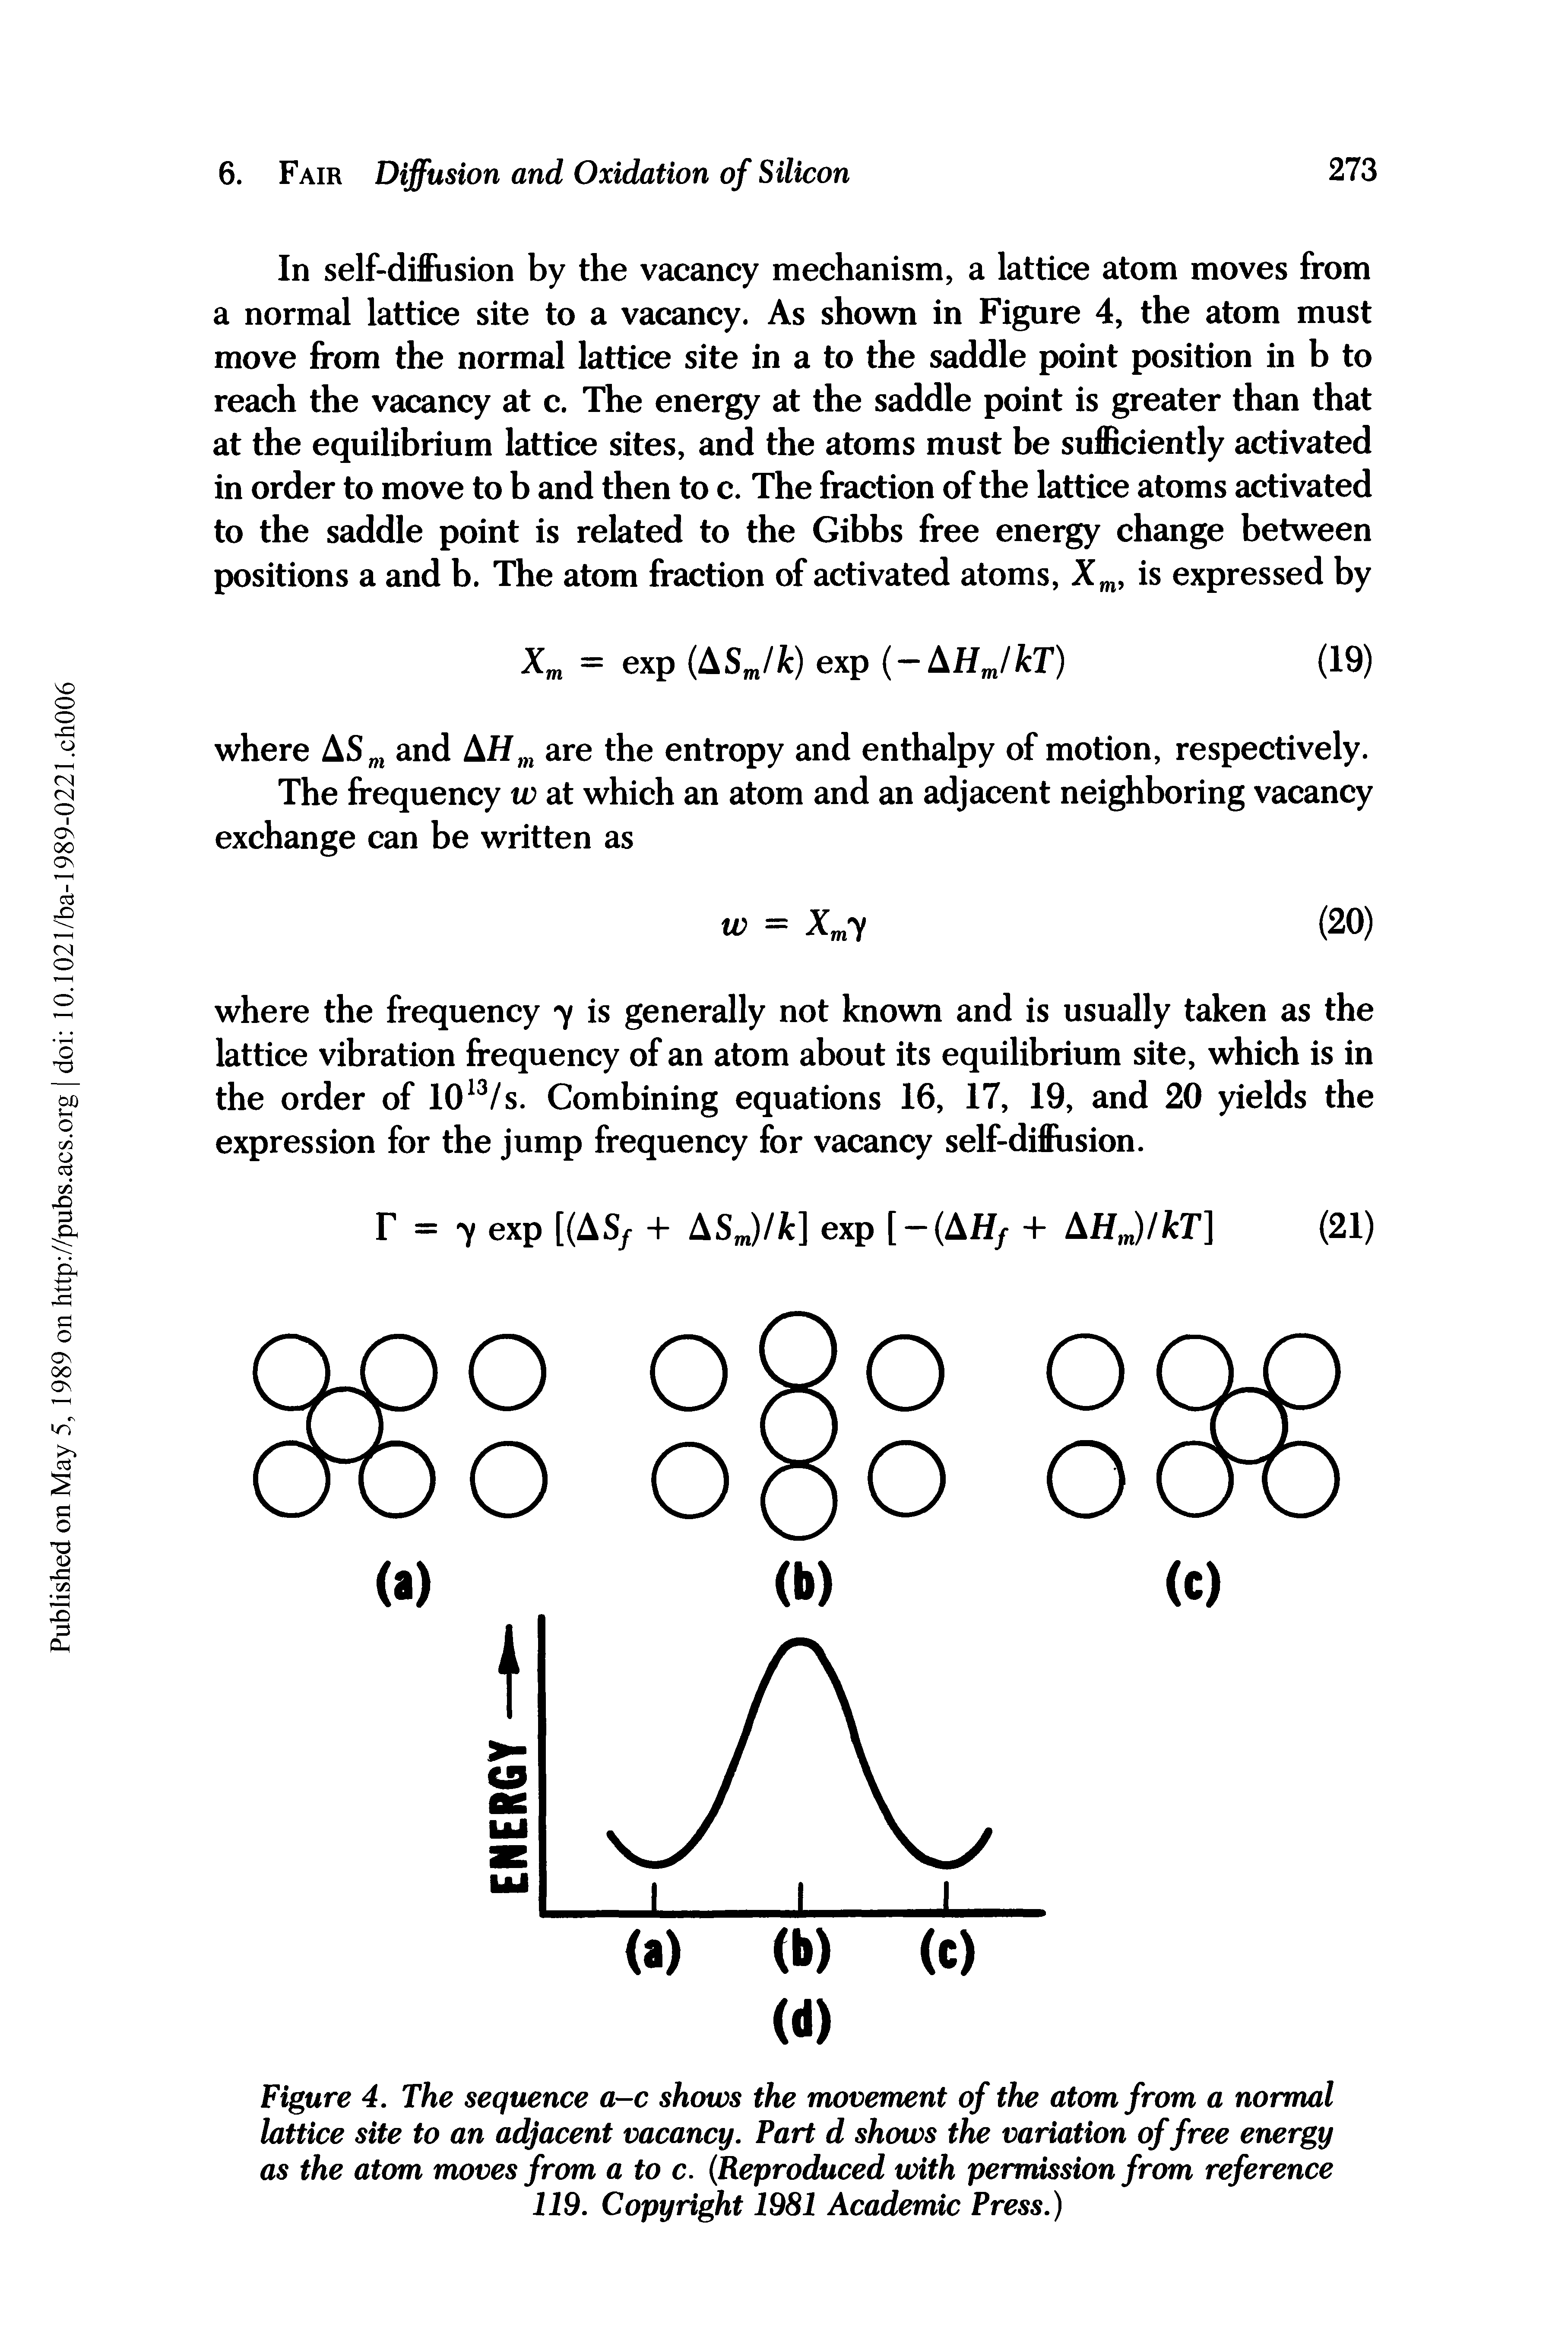 Figure 4. The sequence a-c shows the movement of the atom from a normal lattice site to an adjacent vacancy. Part d shows the variation of free energy as the atom moves from a to c. (Reproduced with permission from reference 119. Copyright 1981 Academic Press.)...